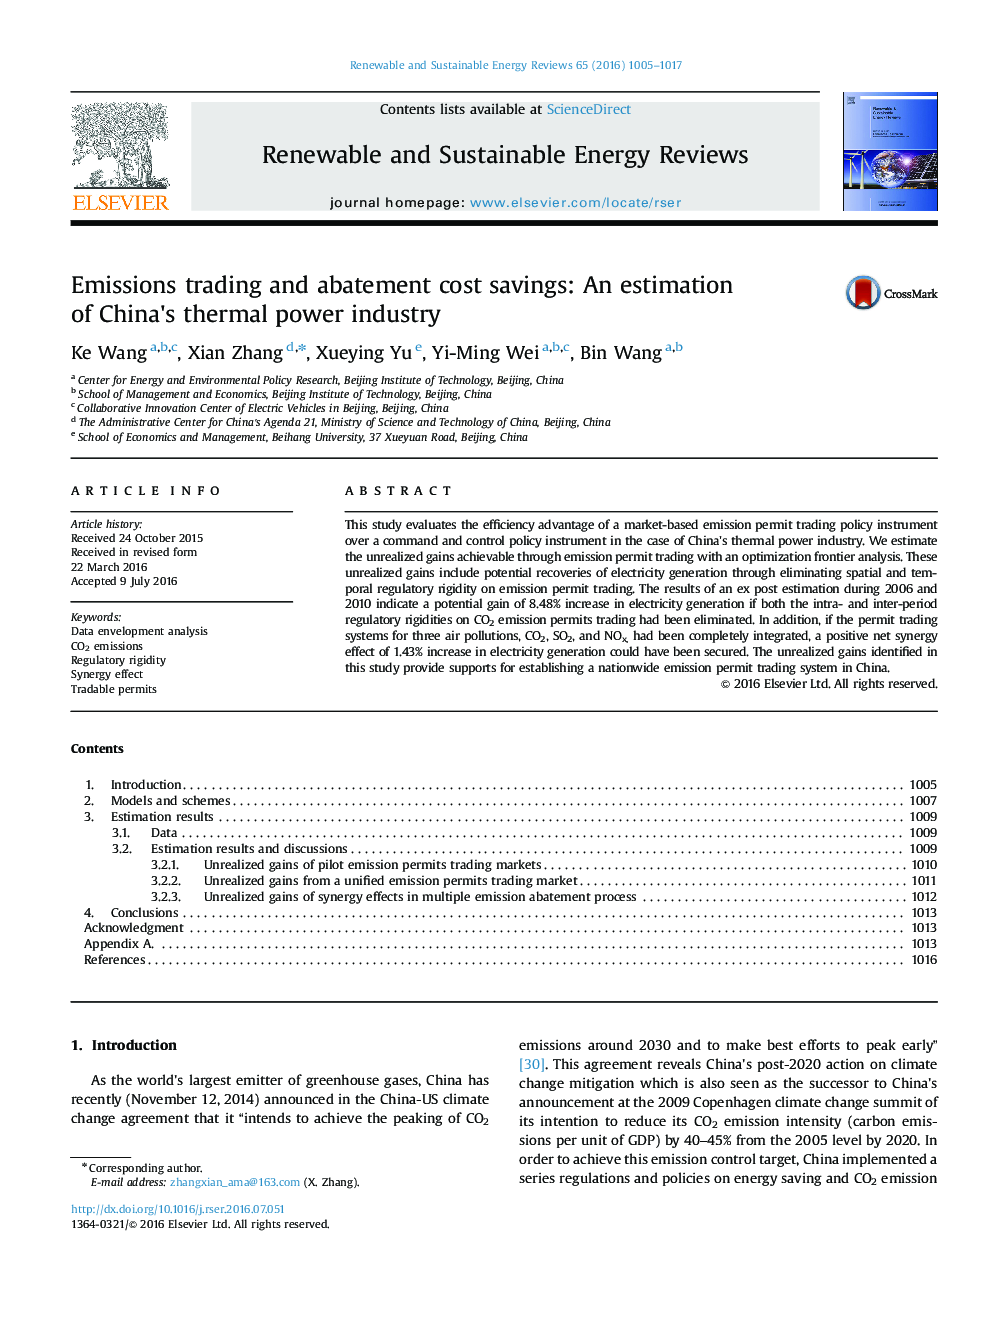 Emissions trading and abatement cost savings: An estimation of China's thermal power industry